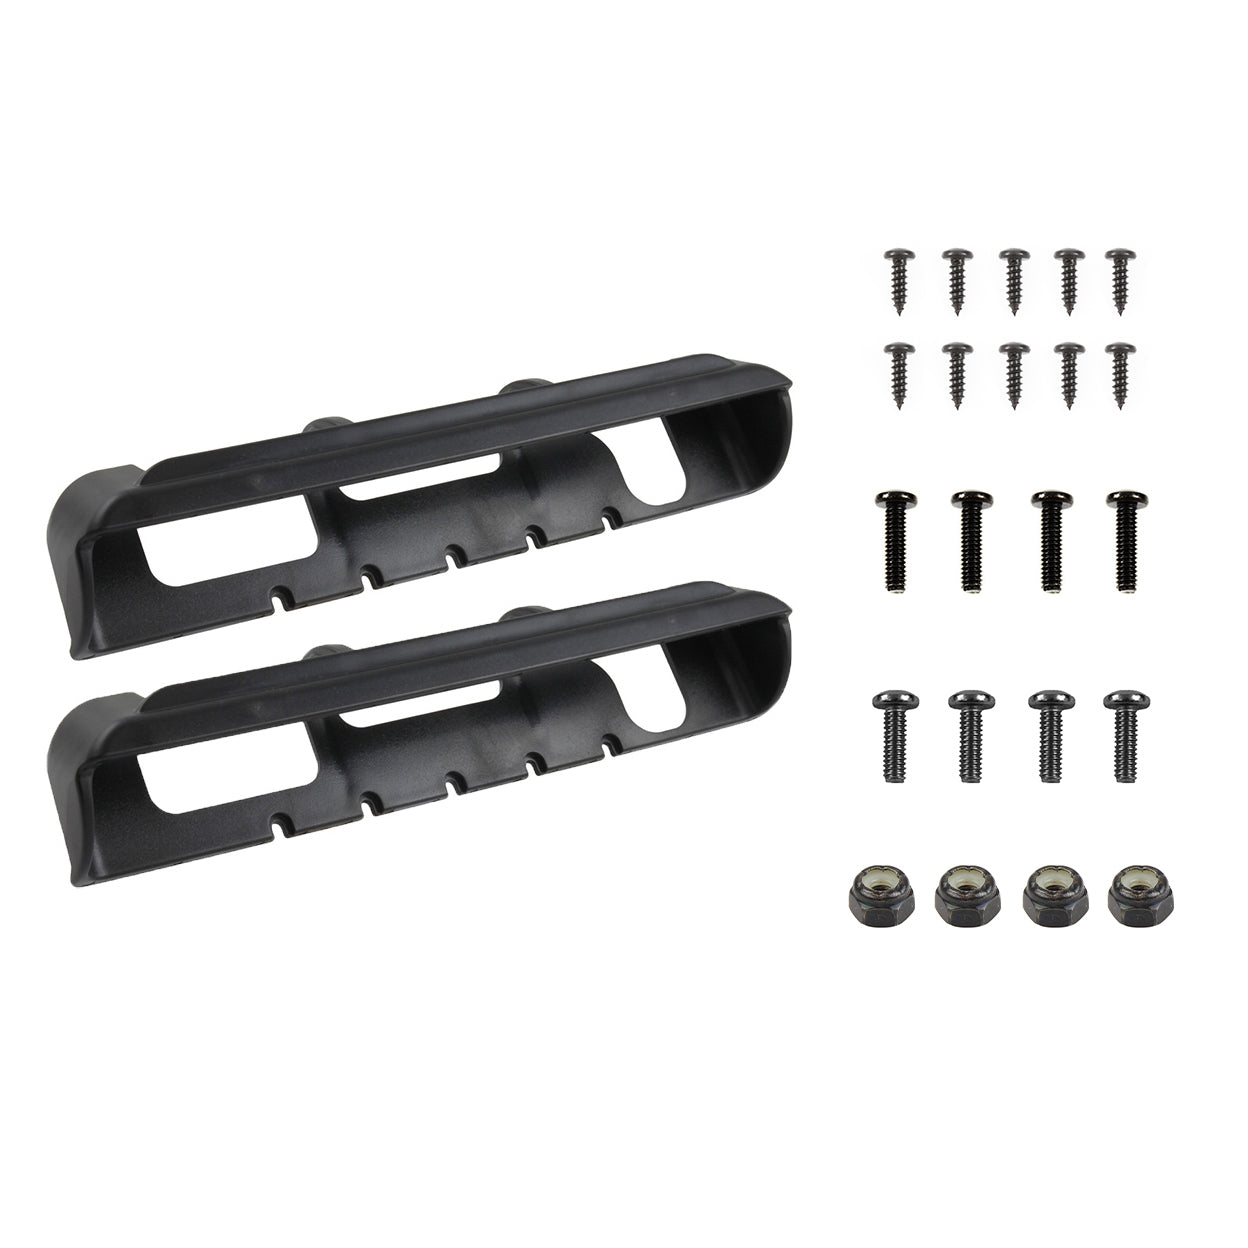 RAM® End Cups for Apple iPad Pro 9.7 with + More – RAM Mounts